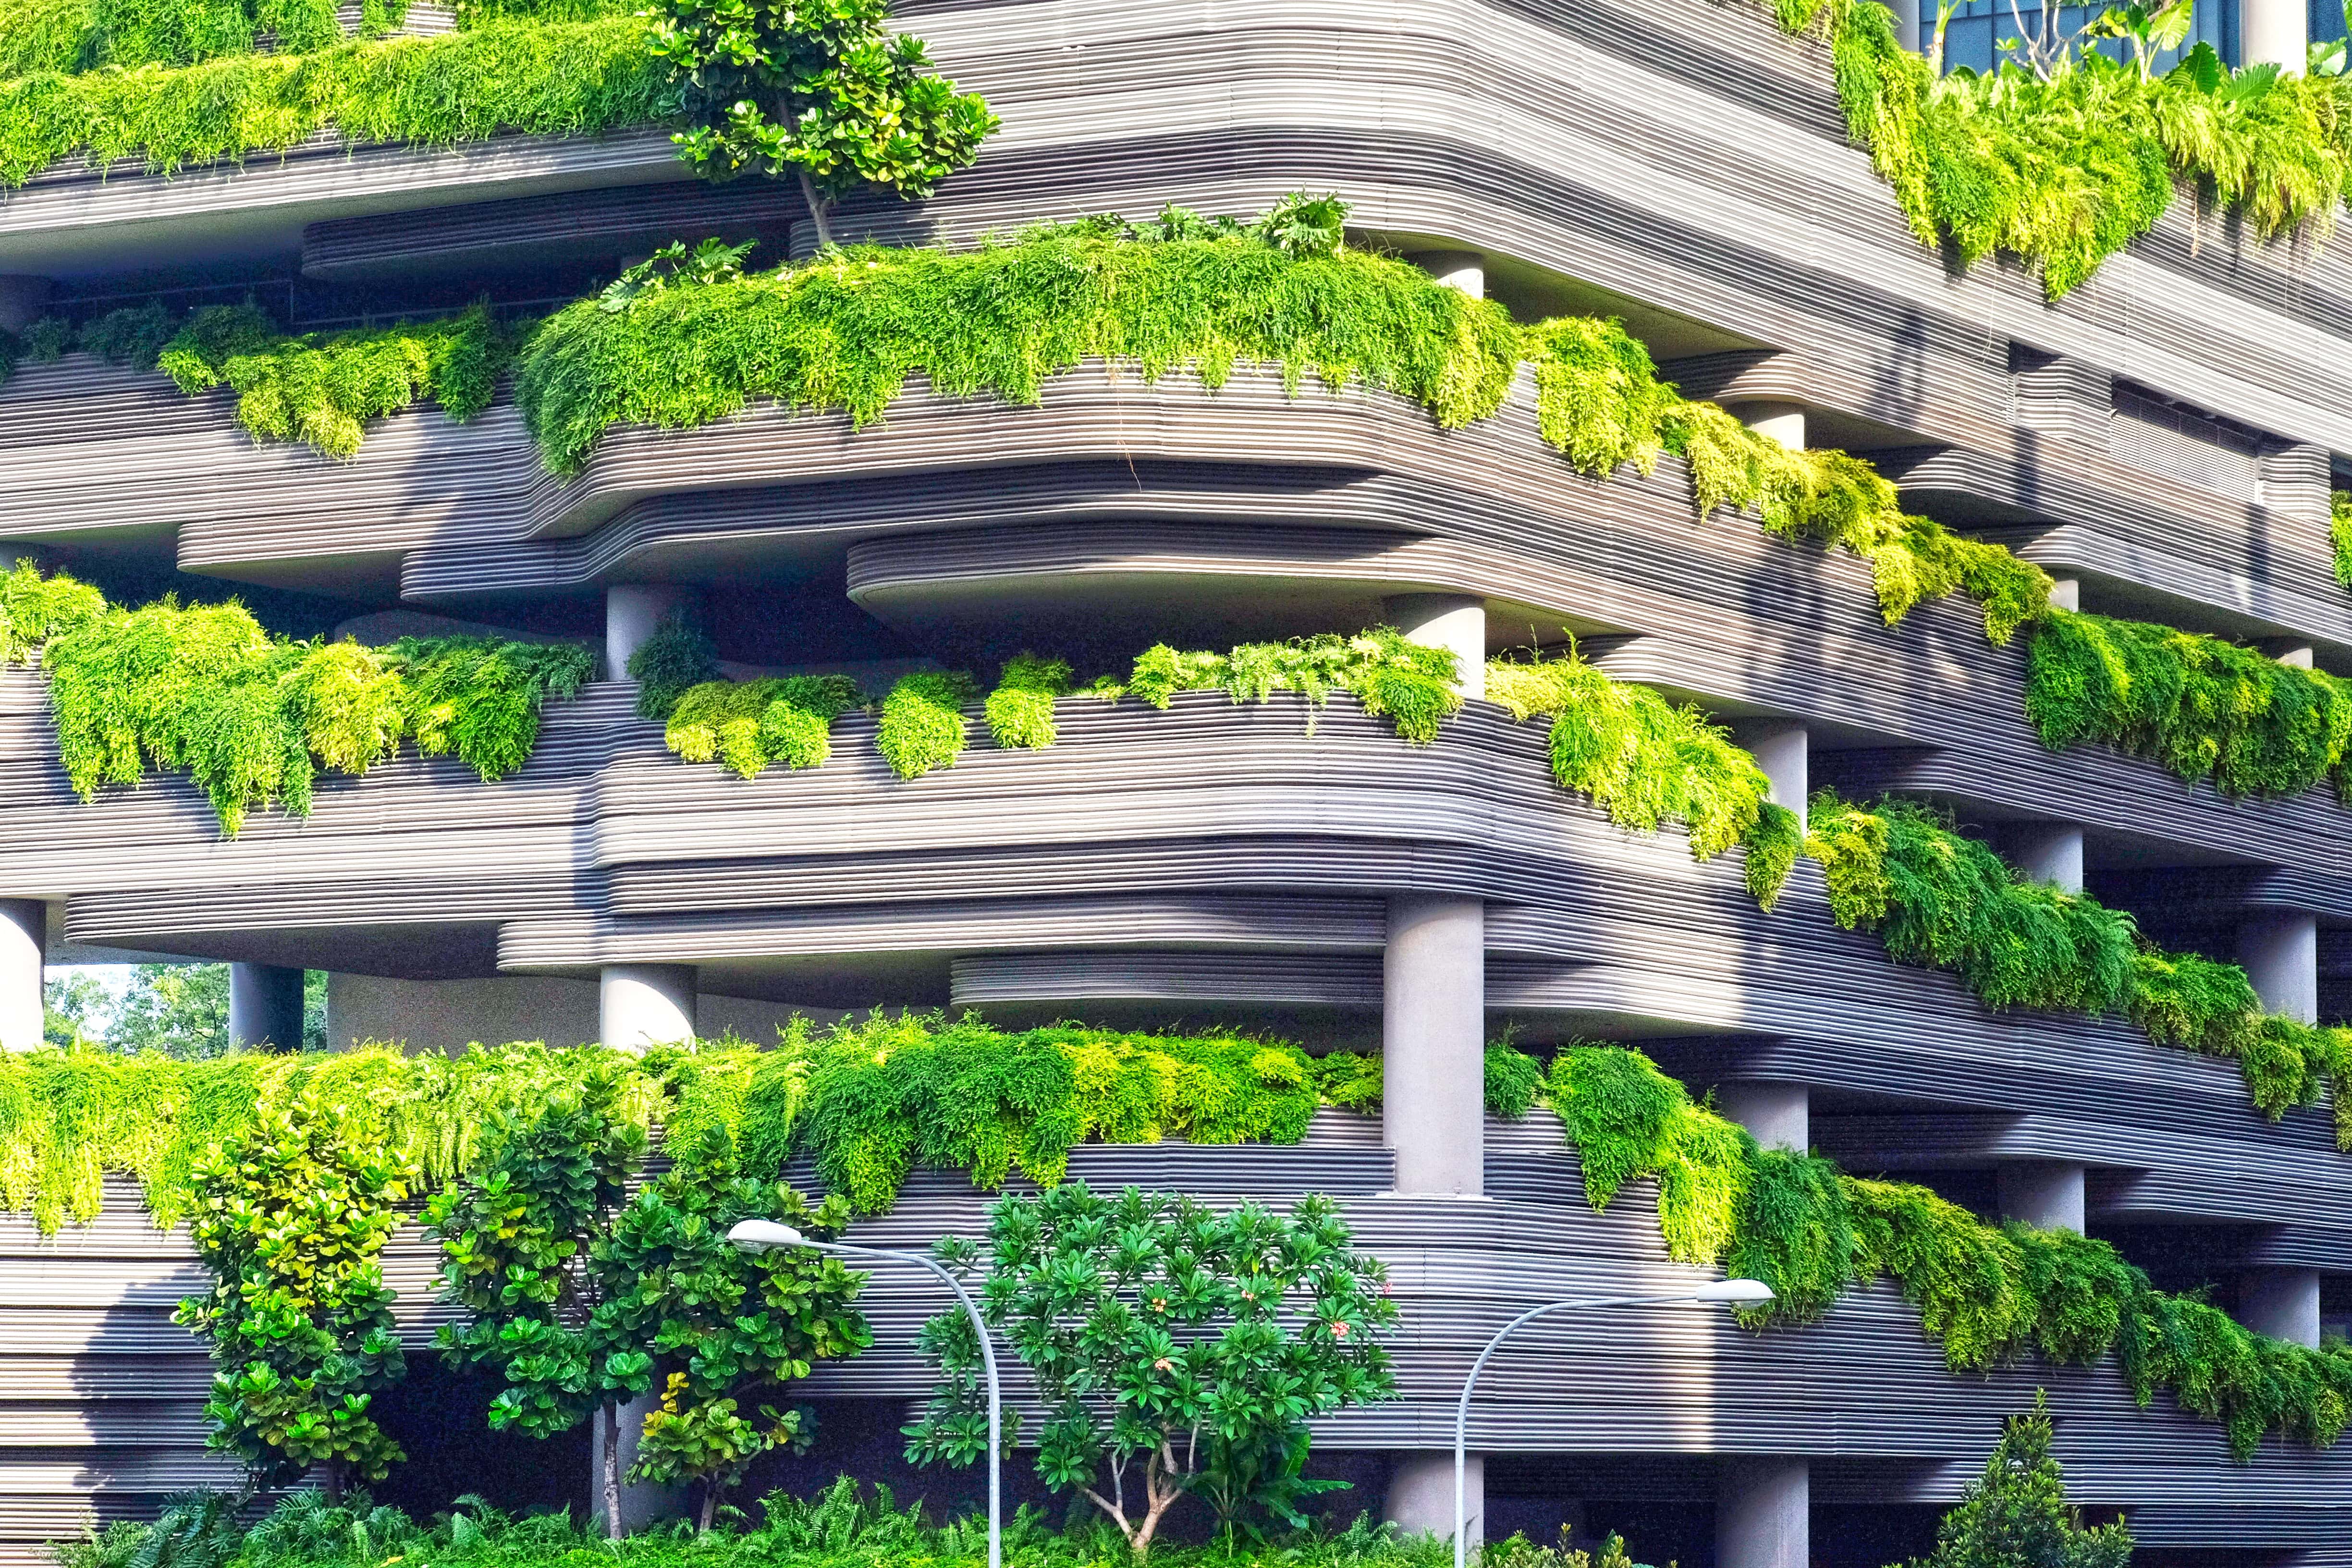 E Co. institute: Register now for our upcoming webinar - Sustainable cities & tech innovation